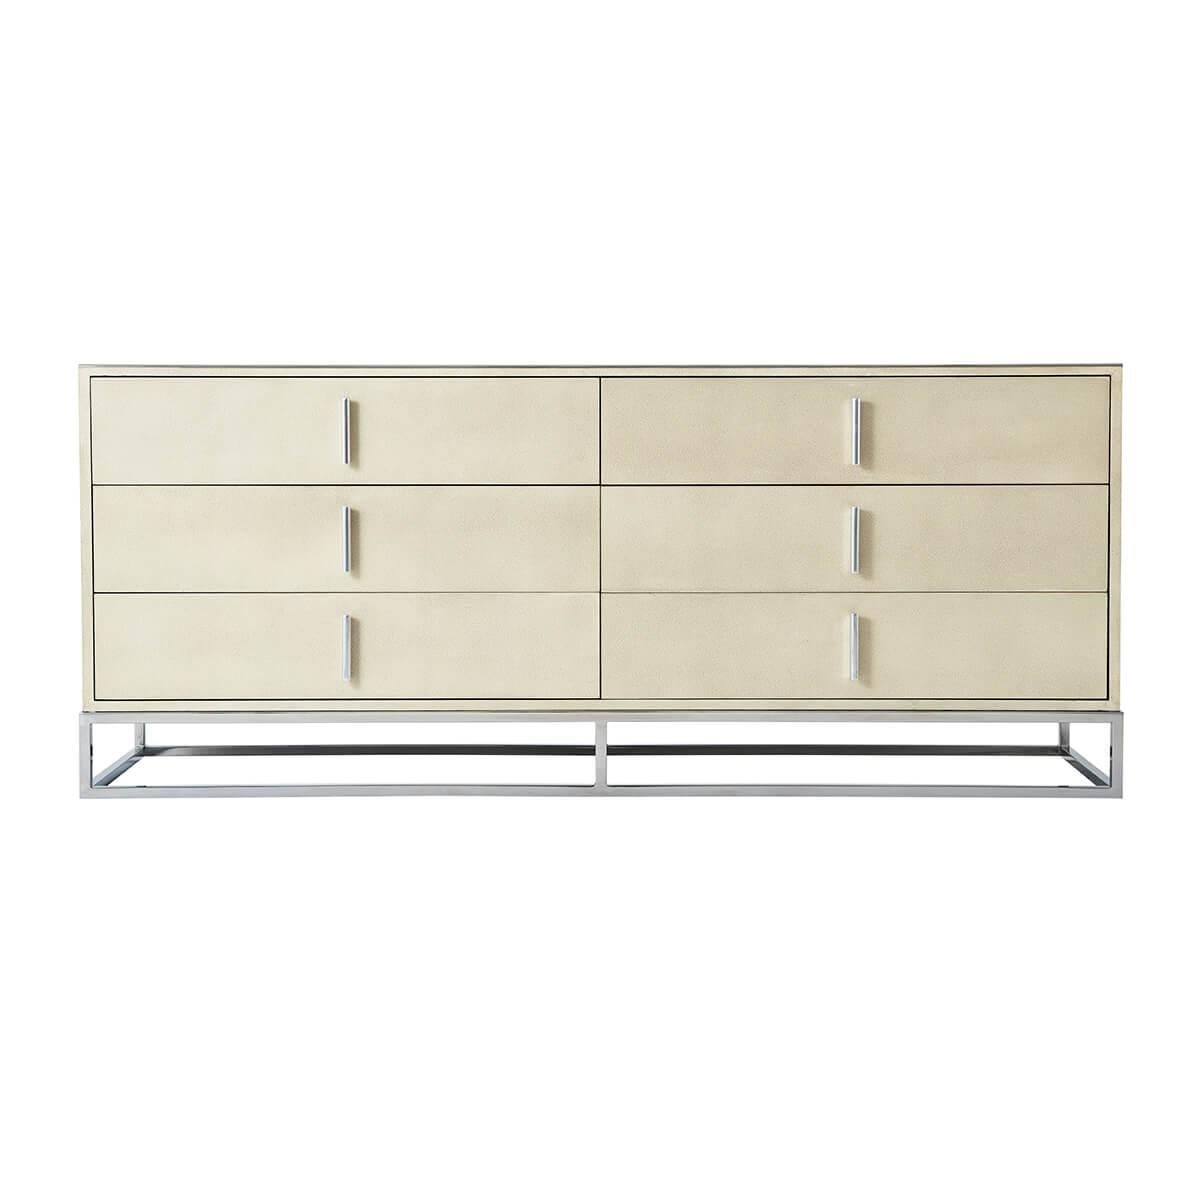 Wrapped in a shagreen embossed leather in our light overcast dove finish, with six long drawers and with polished nickel finish hardware and trim, all raised on a cube form polished nickel base.

Dimensions: 72